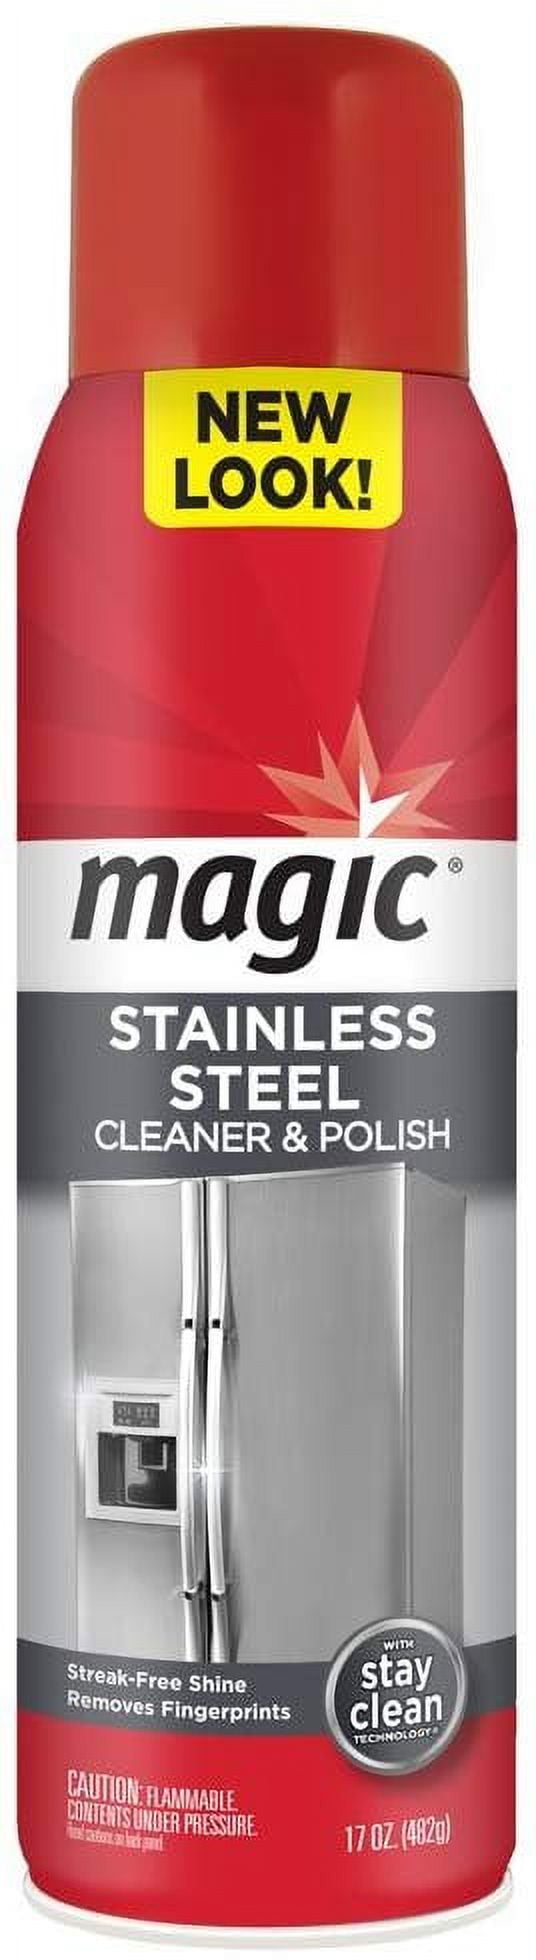 Magic Stainless Steel Cleaner & Polish Trigger Spray - Protects Appliances from Fingerprints and Leaves A Streak-Free Shine - 14 fl. oz.